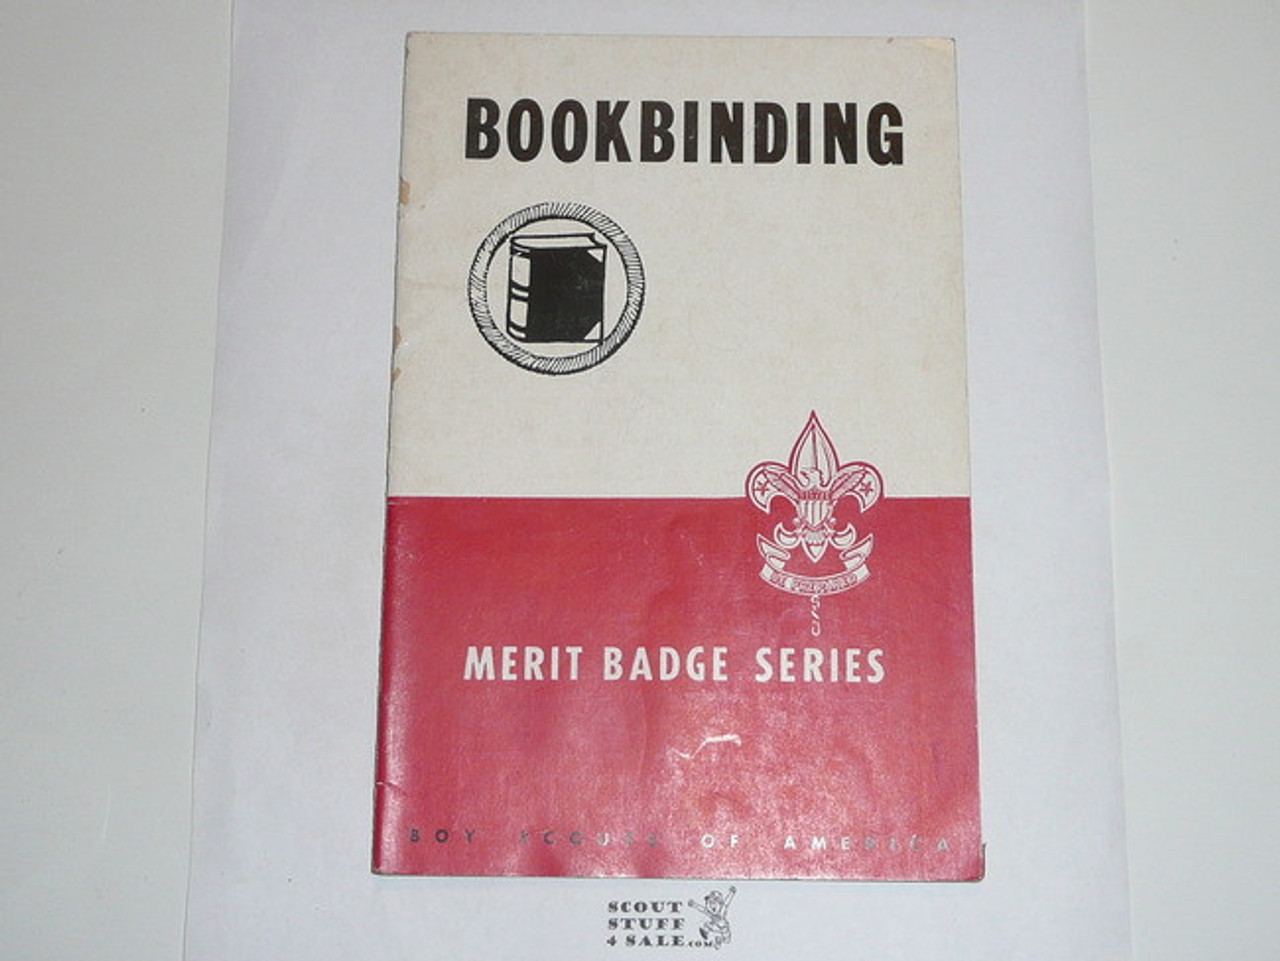 Bookbinding Merit Badge Pamphlet, Type 5, Red/Wht Cover, 8-48 Printing